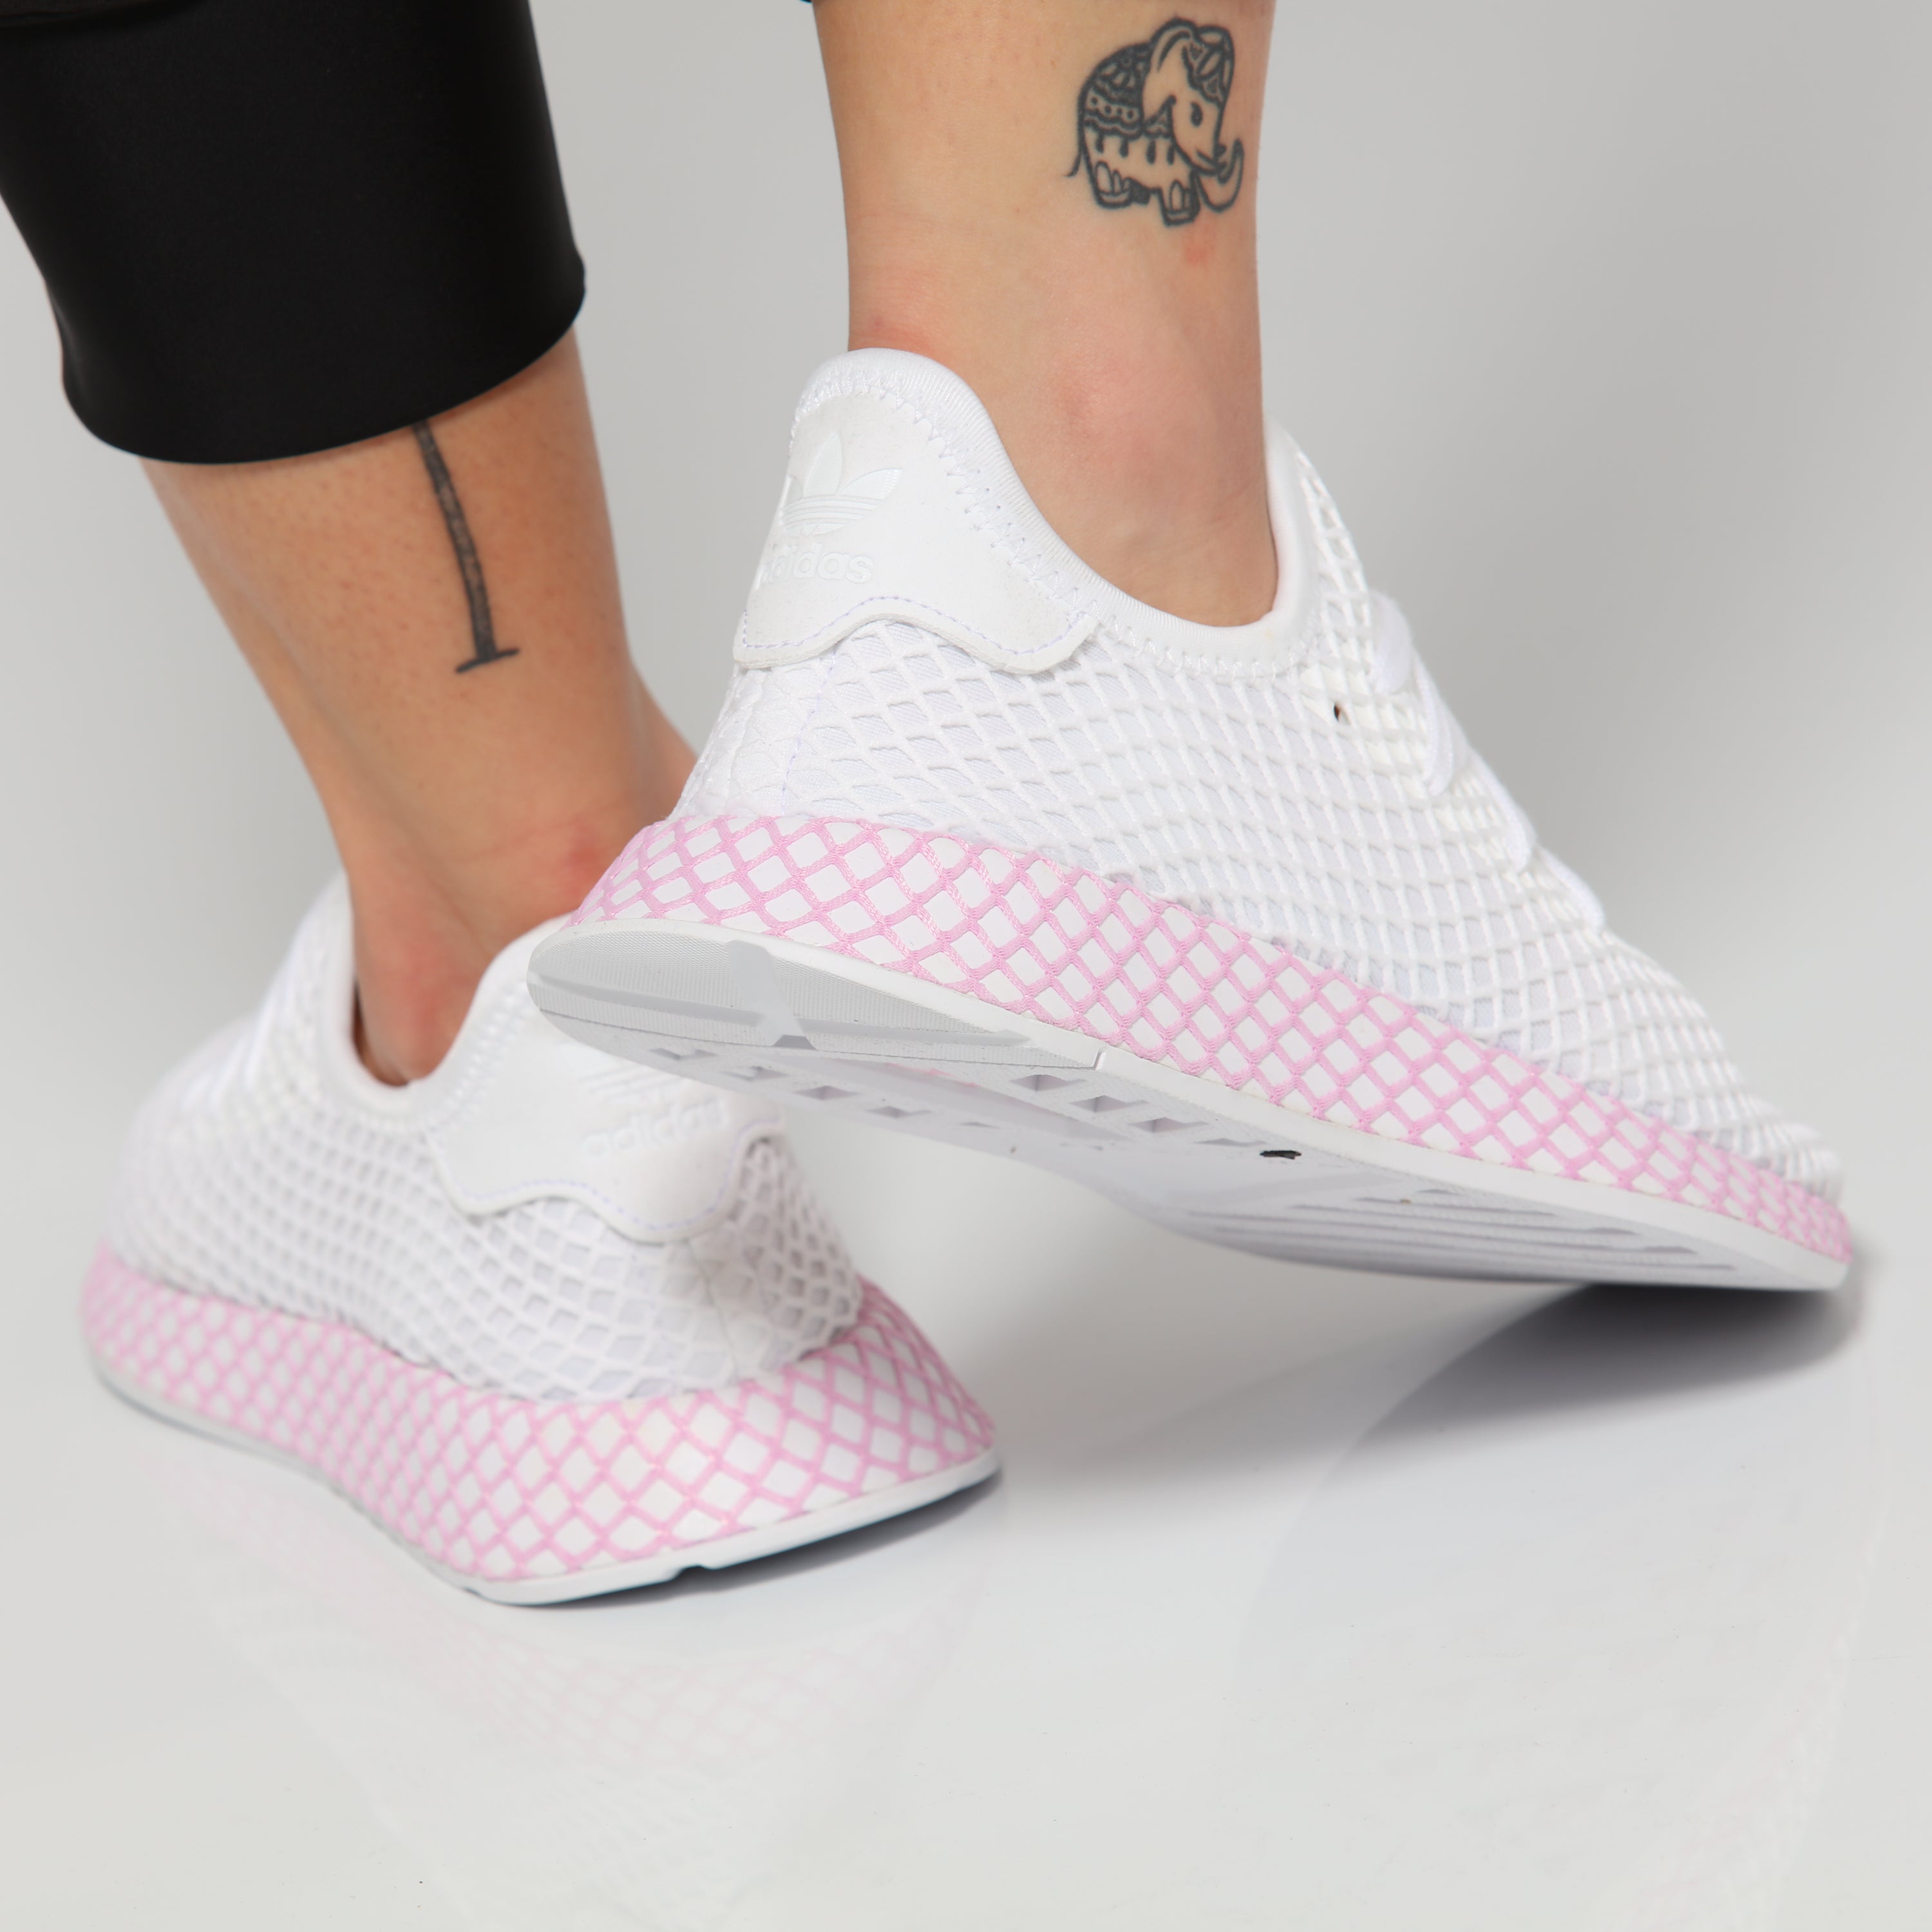 deerupt white and pink